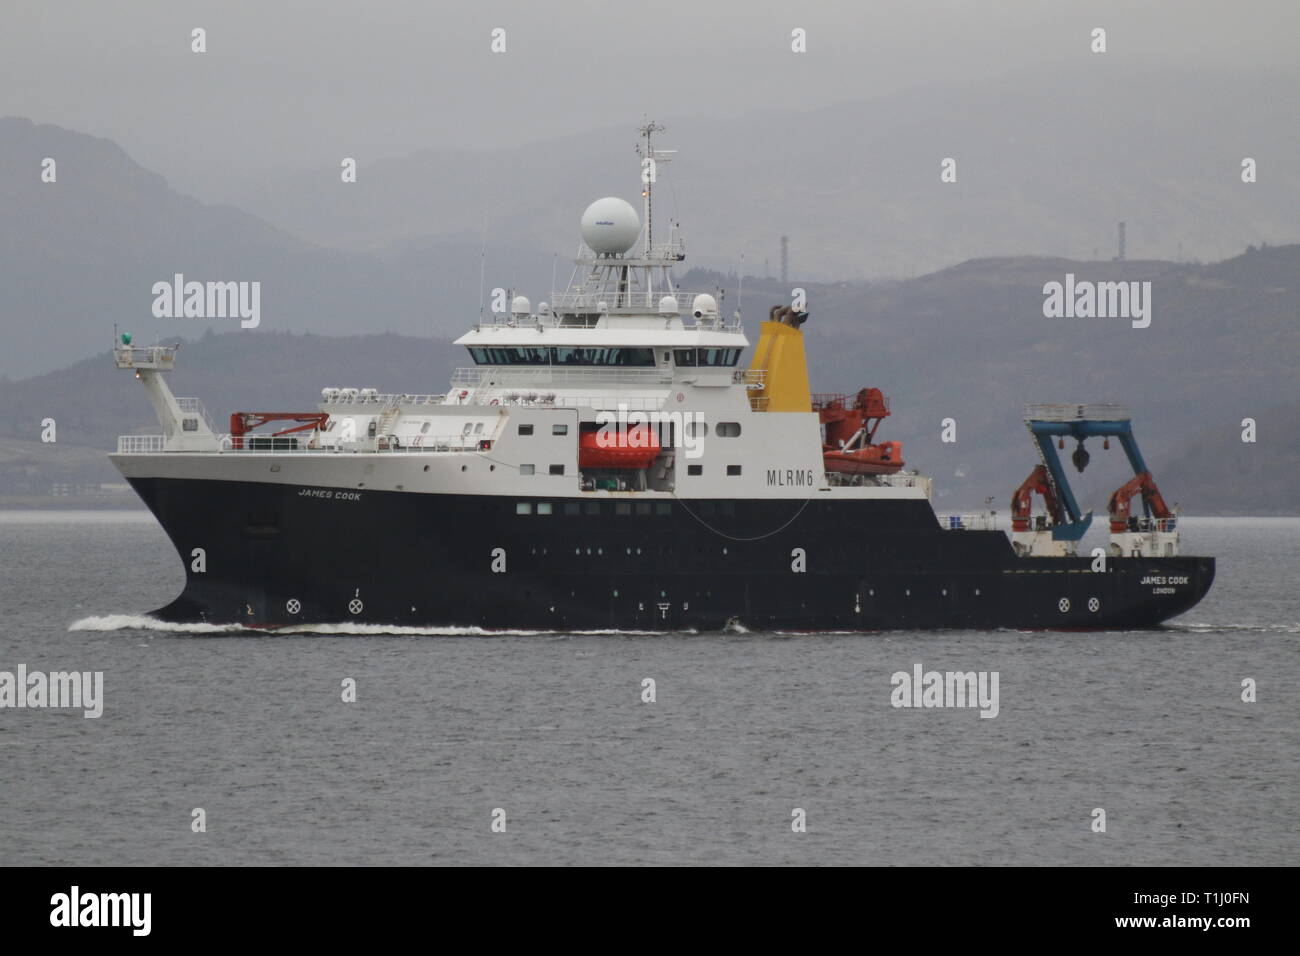 RRS James Cook, a research vessel operated by the Natural Environment Research Council, on an outbound journey after a visit to the Firth of Clyde. Stock Photo